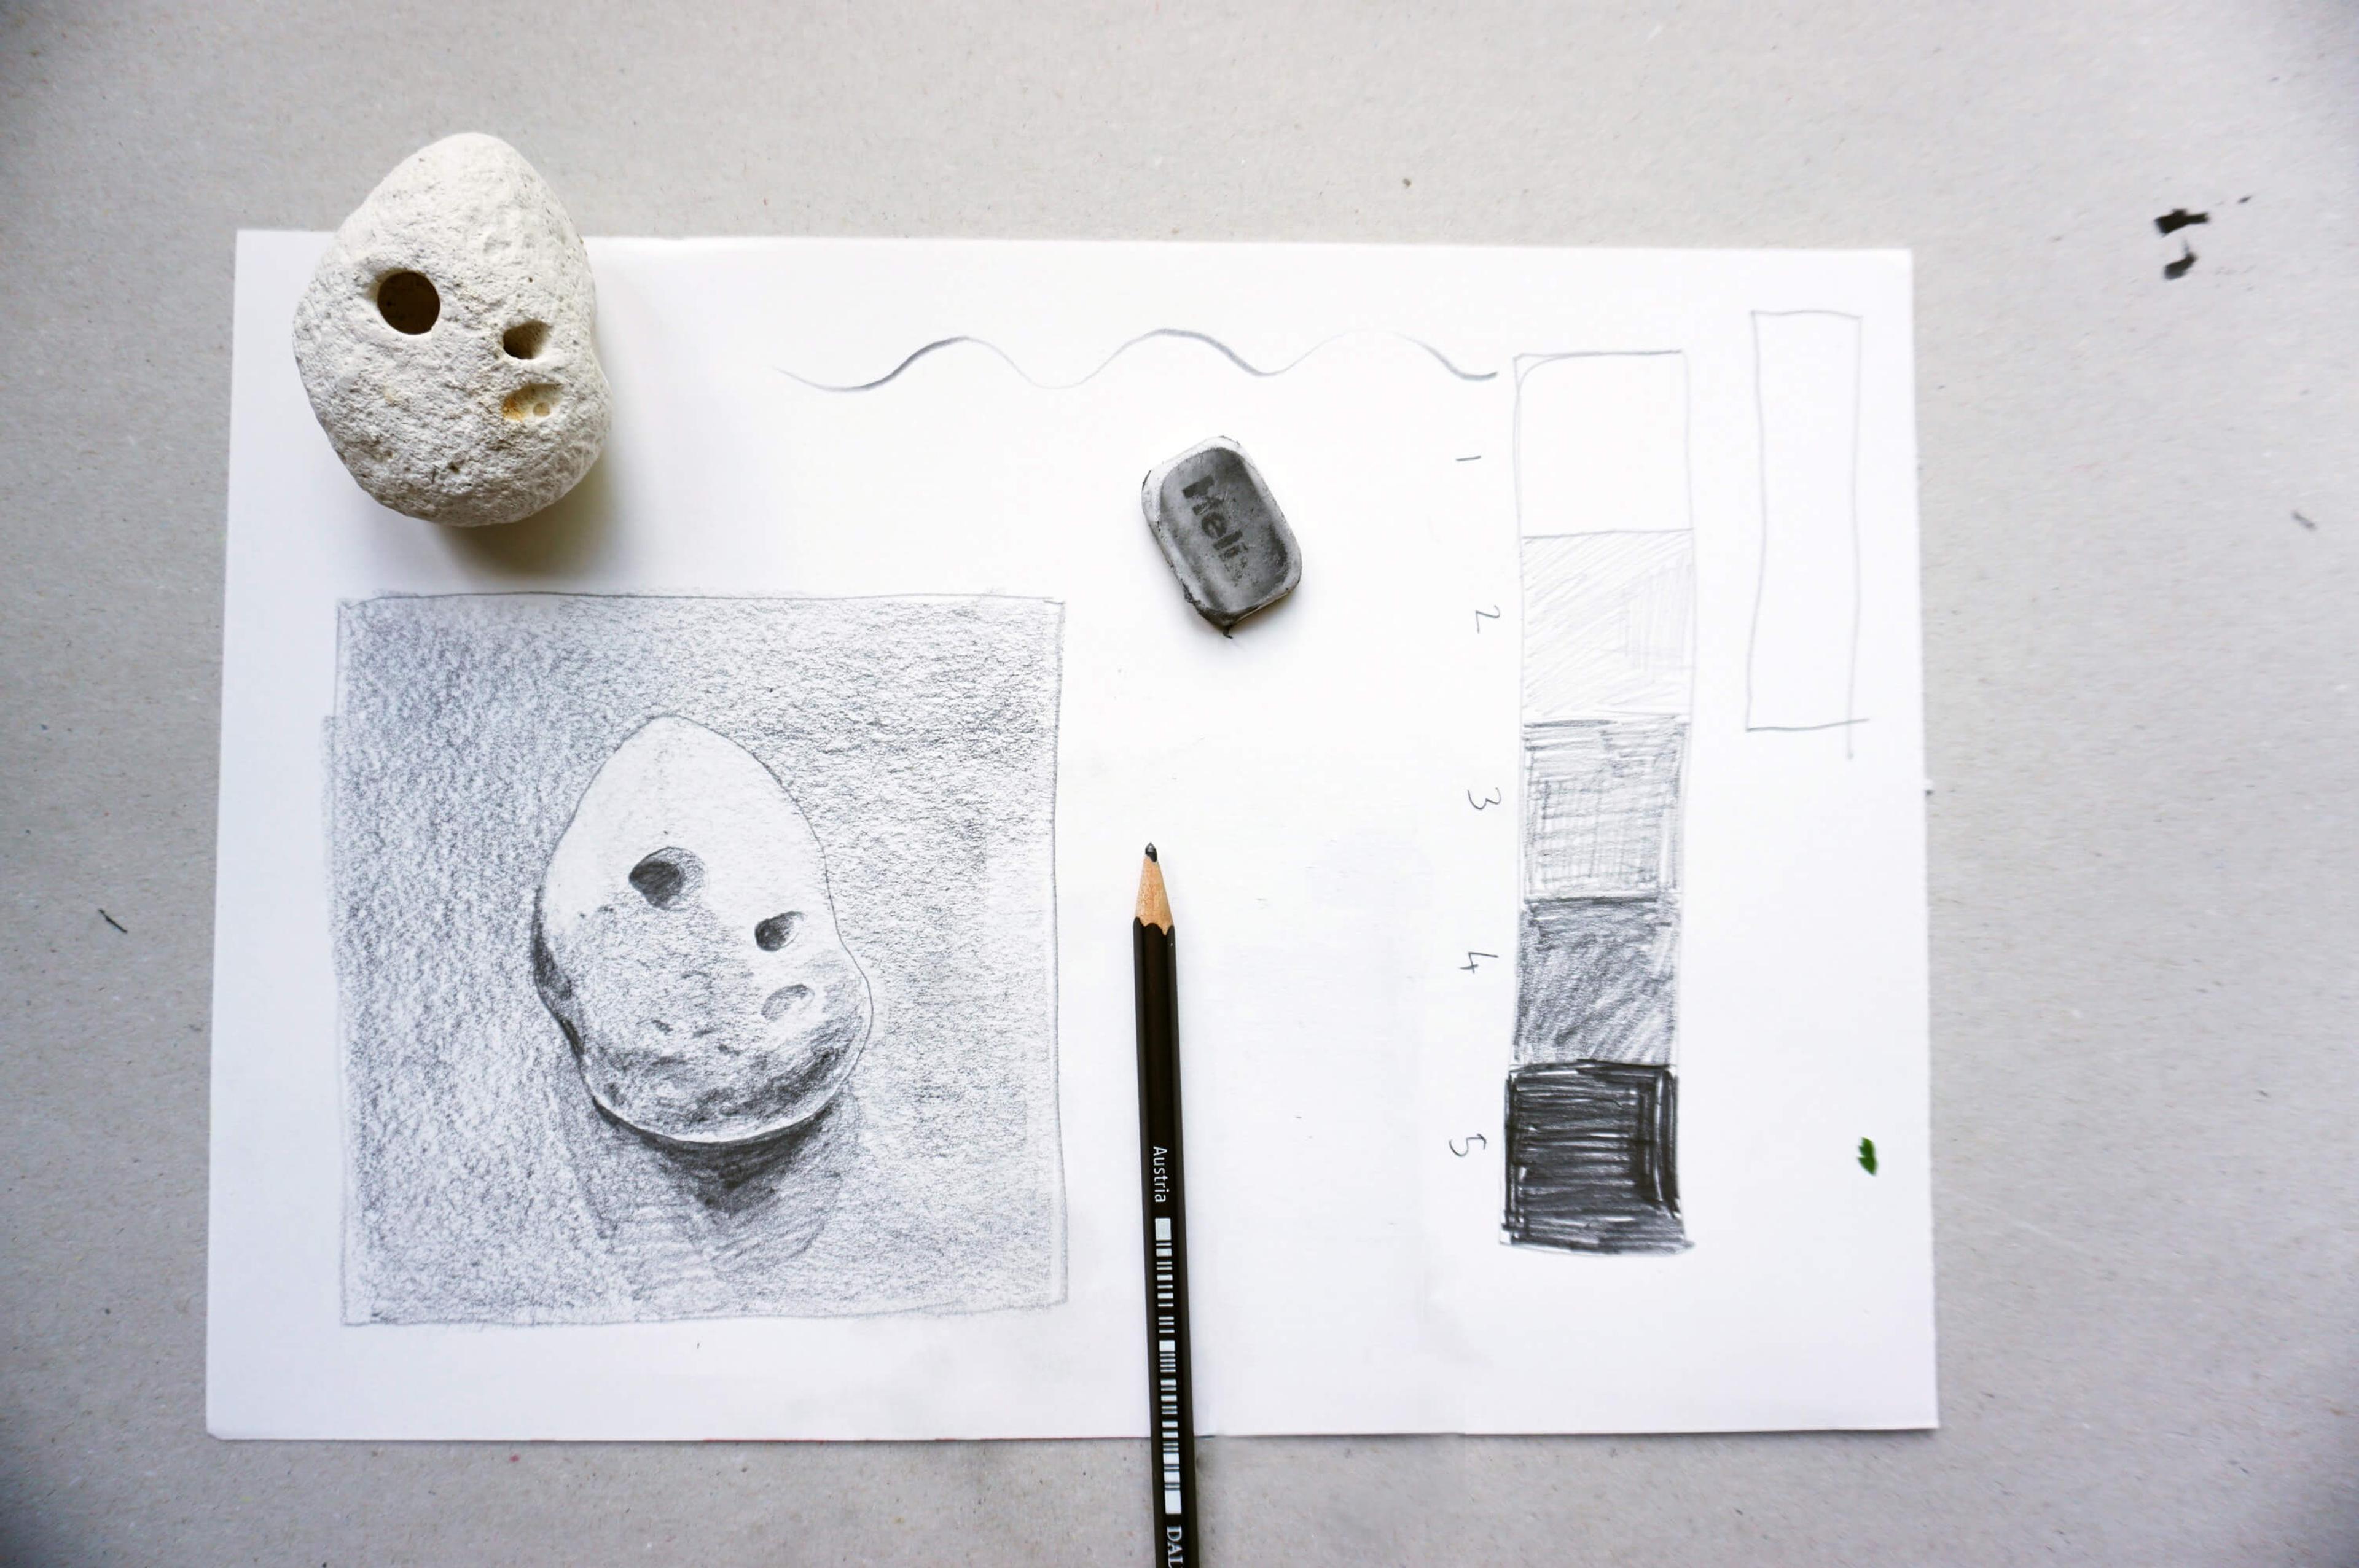 Photograph of a sheet of paper with the sketch of a rock. The rock in the drawing is placed on the sheet, along with a pencil and an eraser.